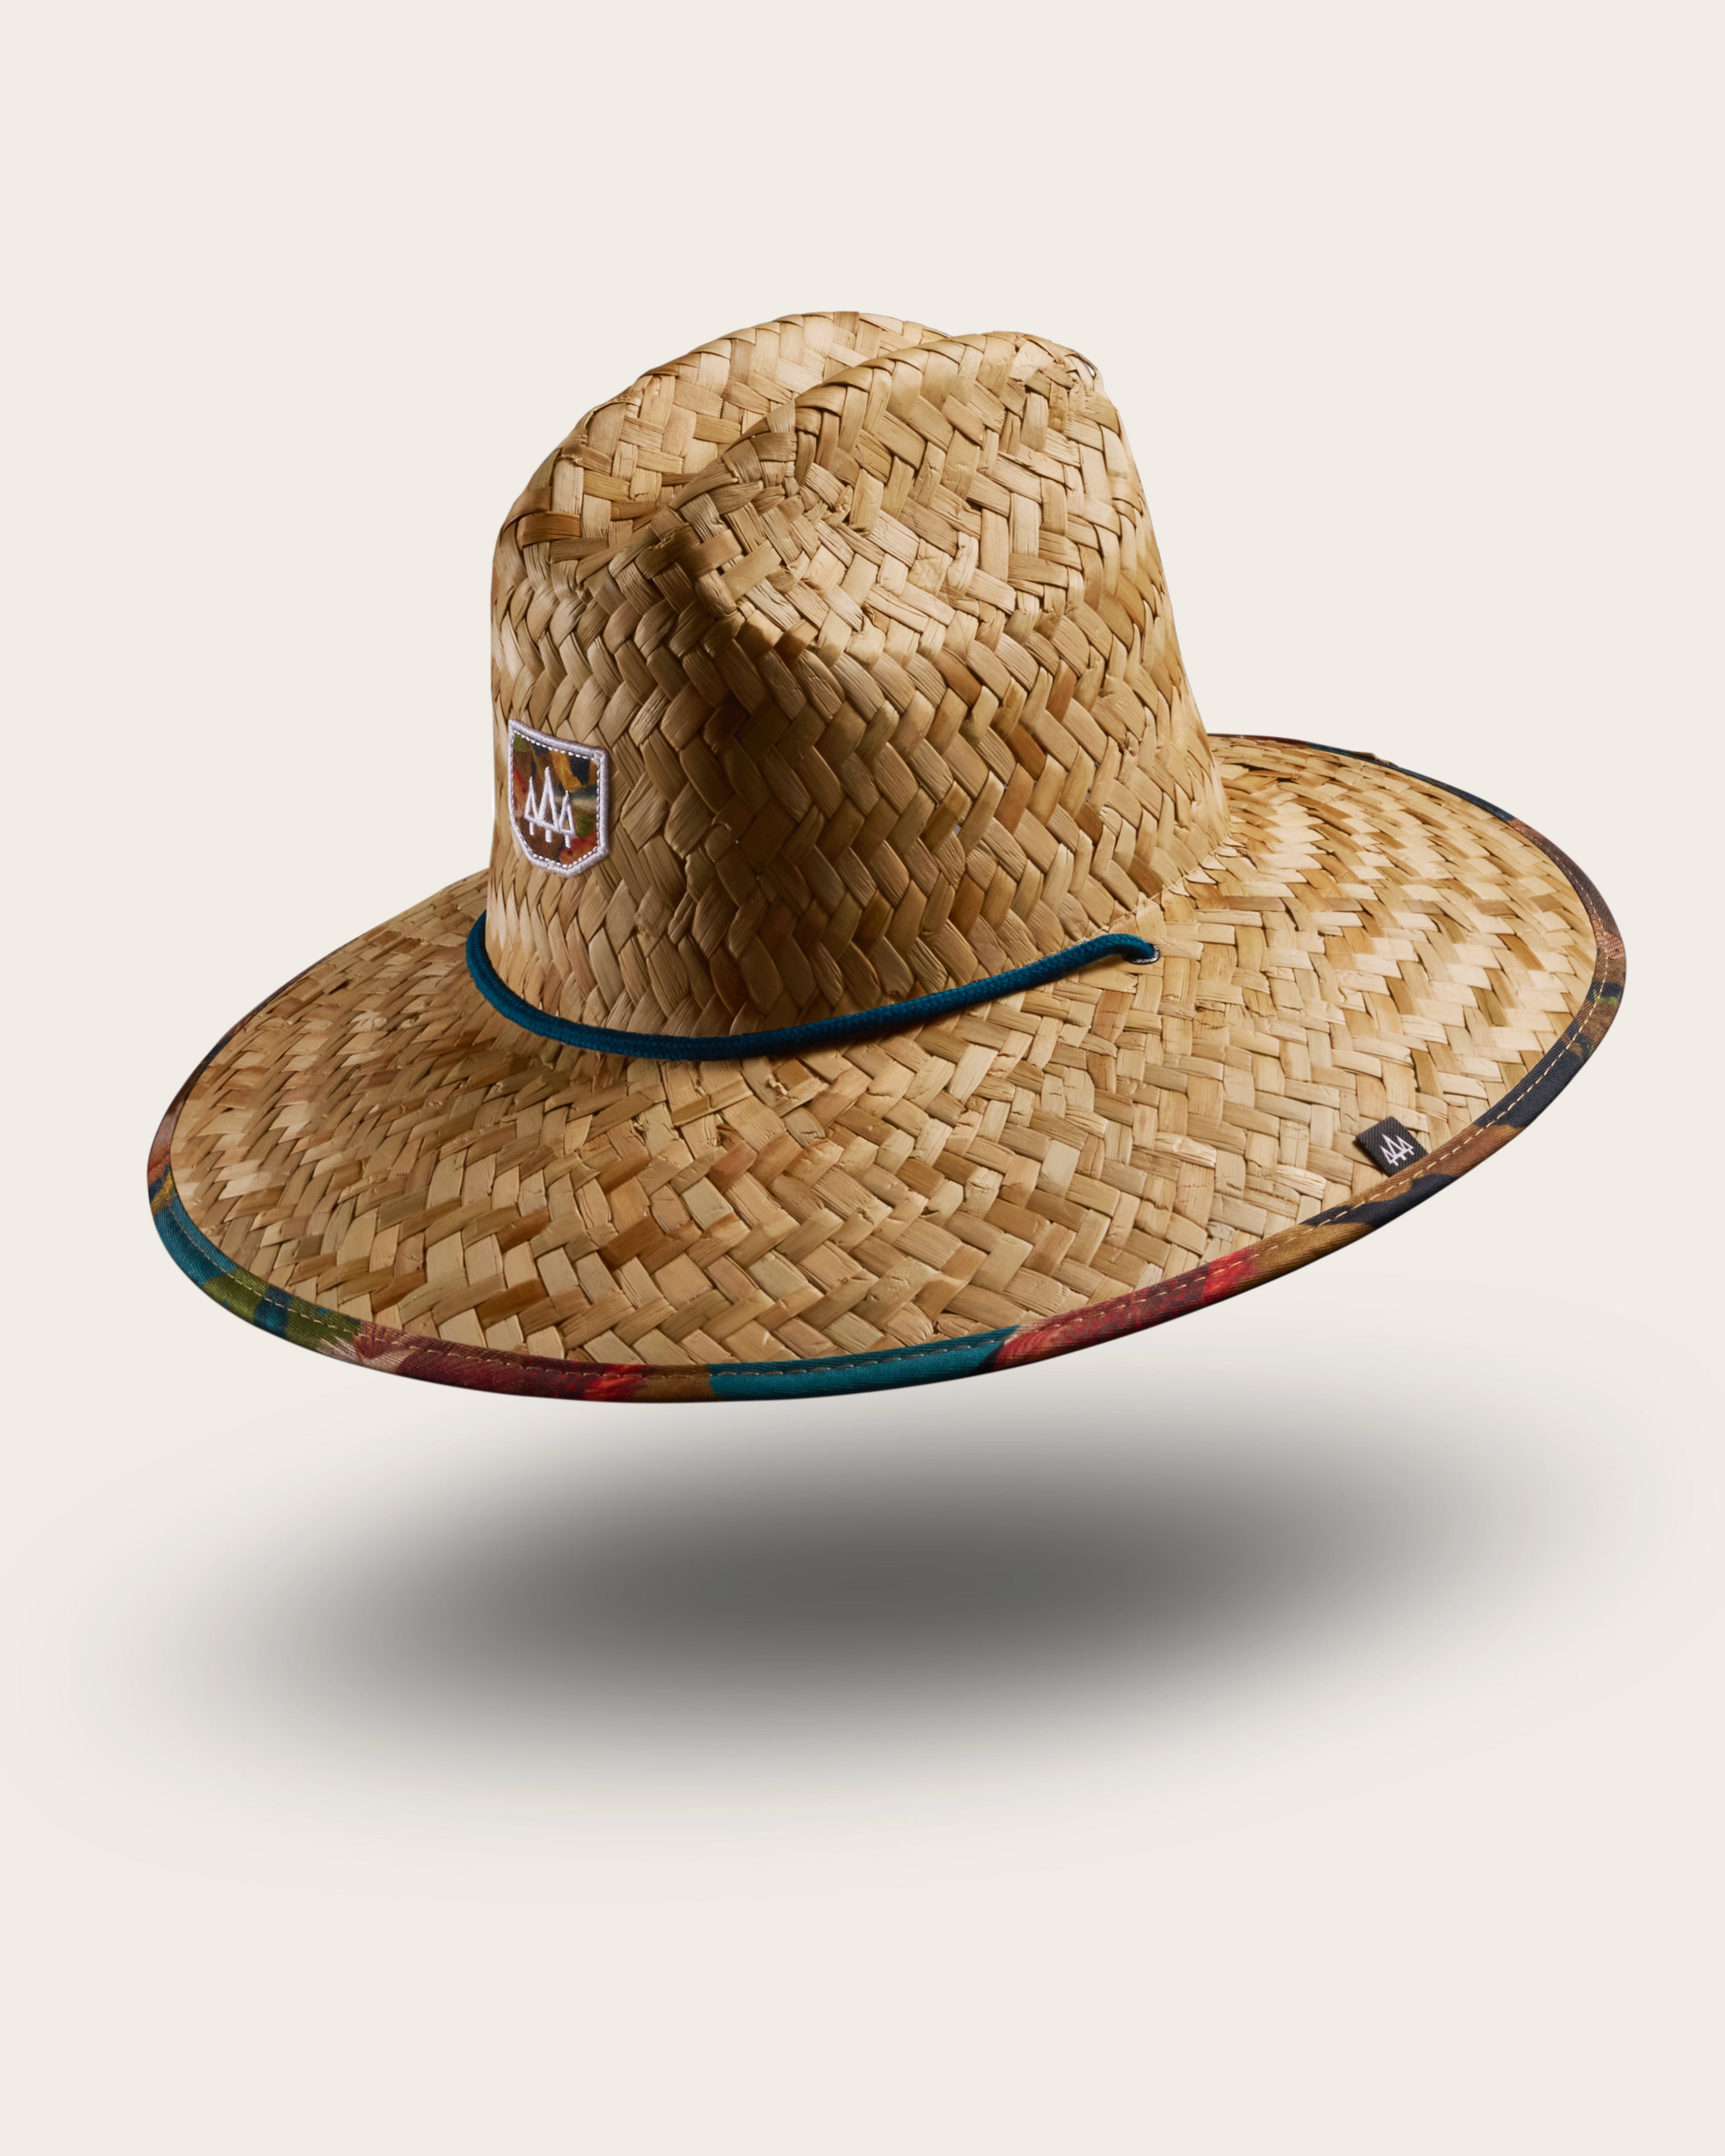 Hemlock Mariner straw lifeguard hat with saltwater fish pattern with patch